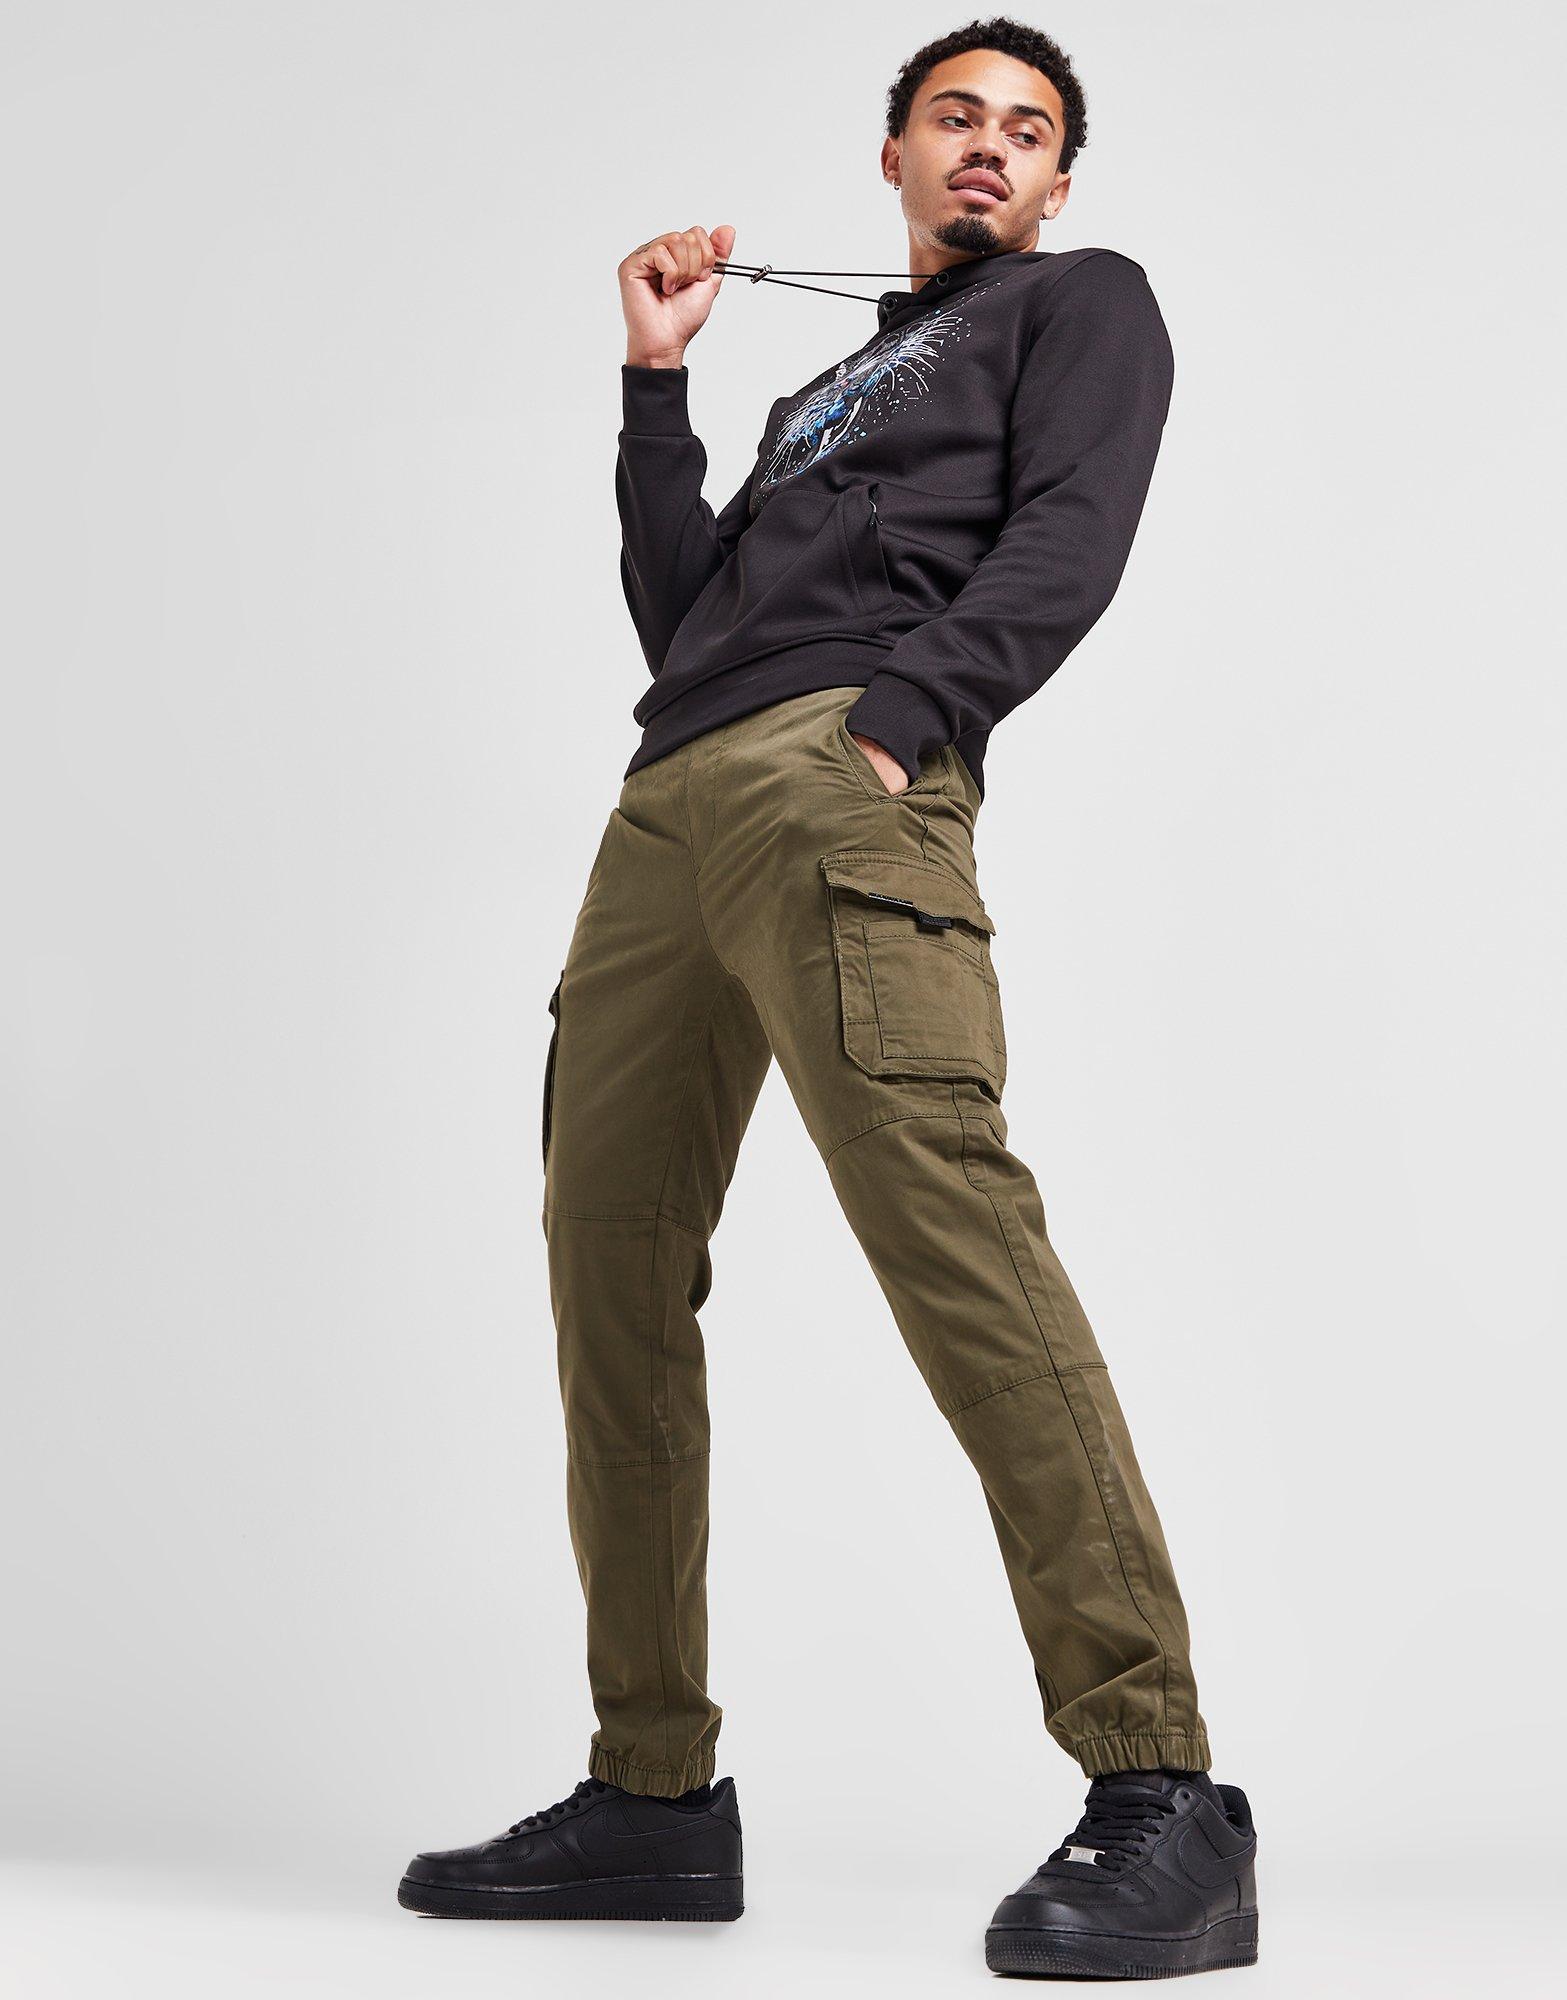 How to Style Olive Green Cargo Pants